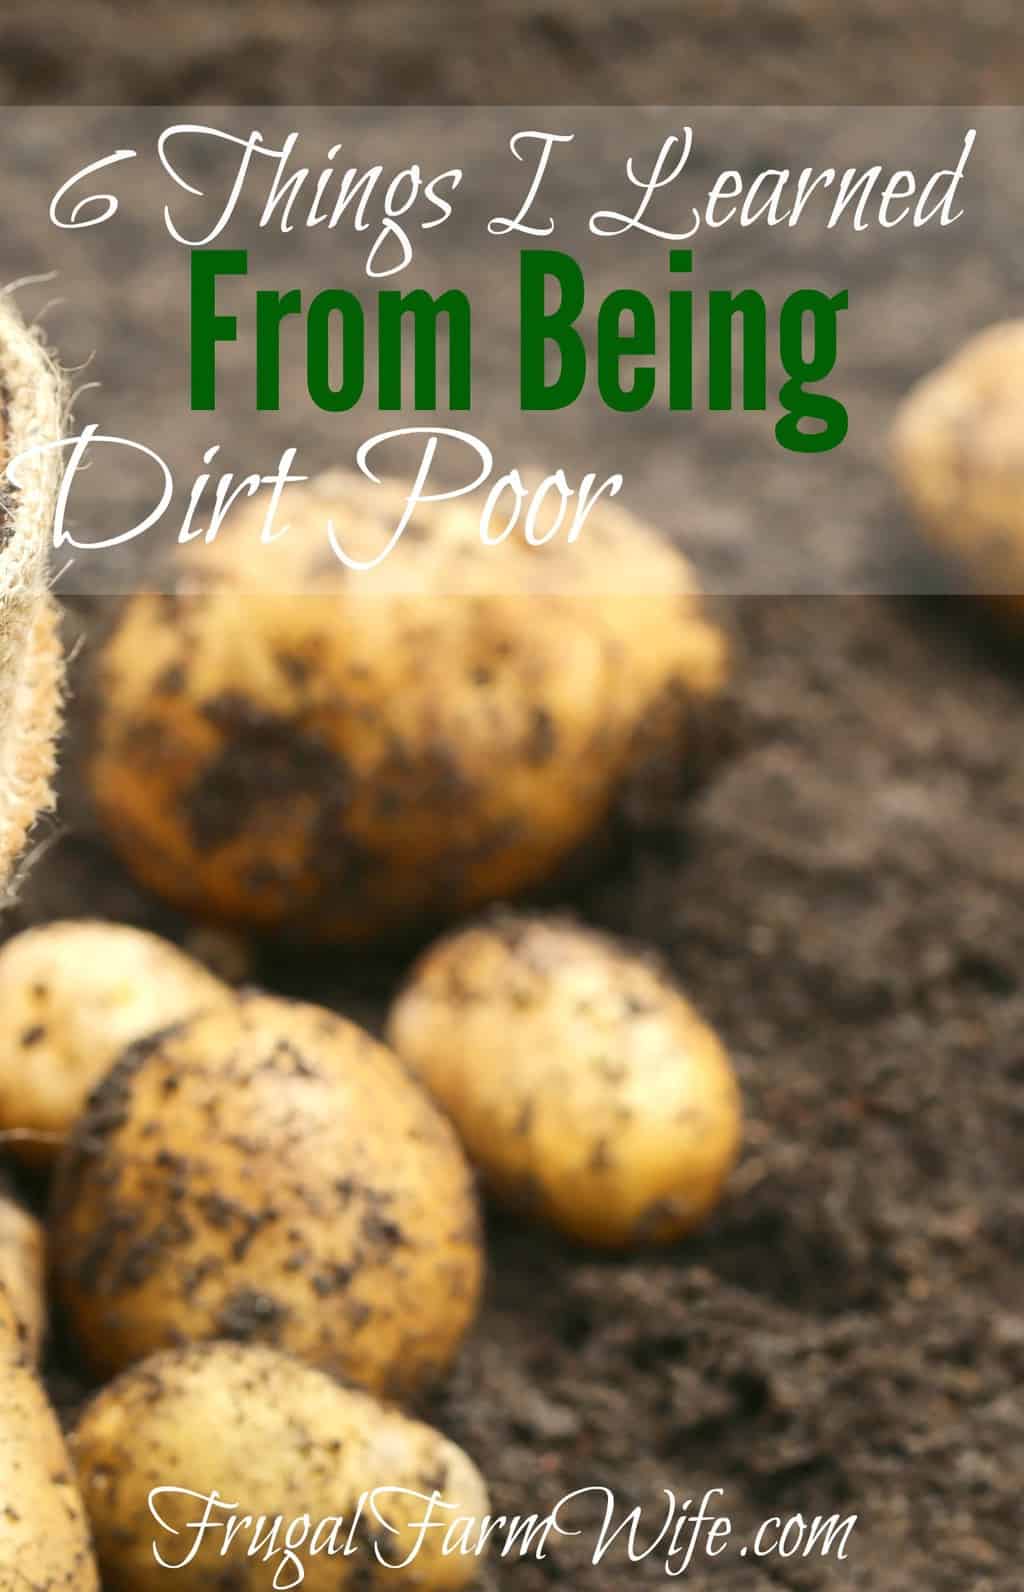 Image shows several dirt covered potatoes sitting outside in some soil. Text overlay reads "6 Things I Learned From Being Dirt Poor"